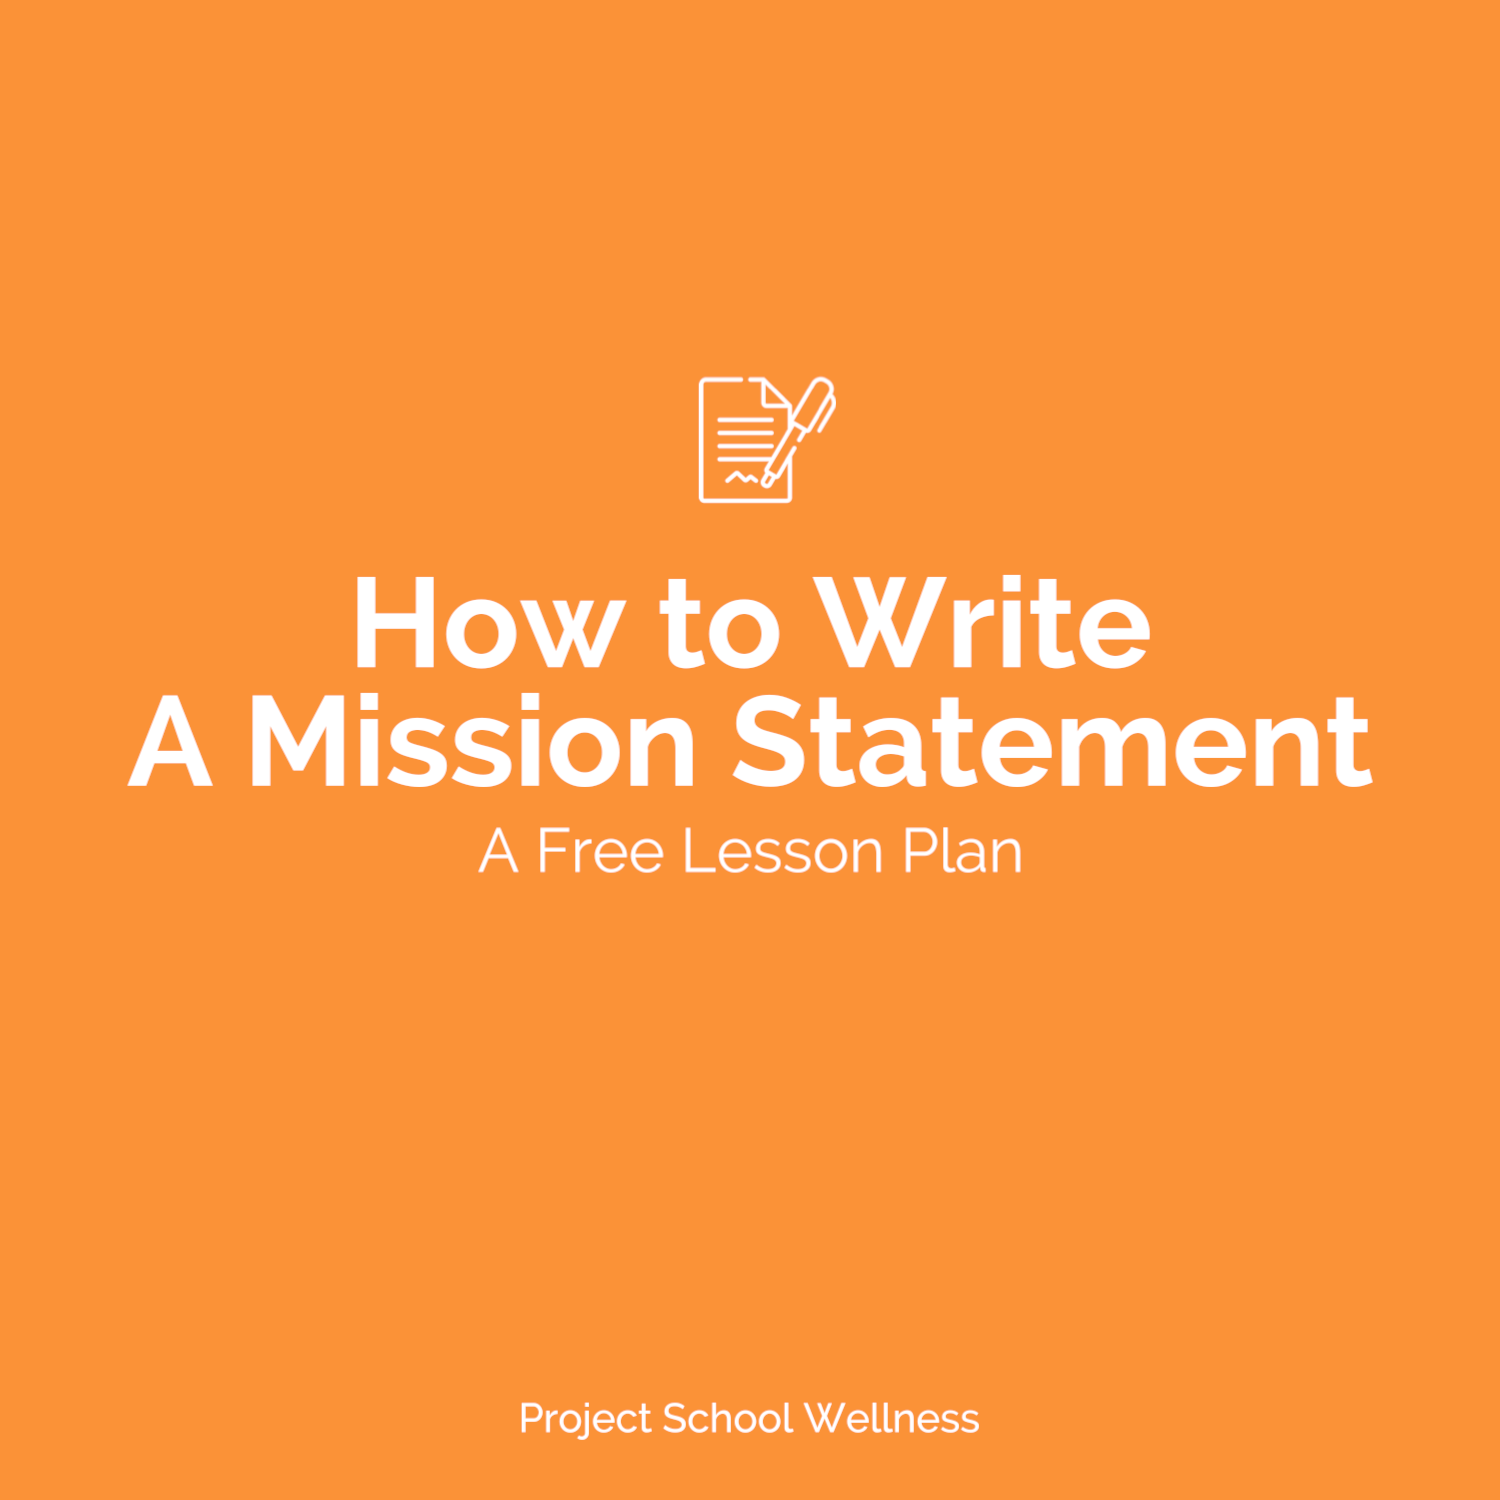 Free Lesson Plan) How to Write a Mission Statement - Project